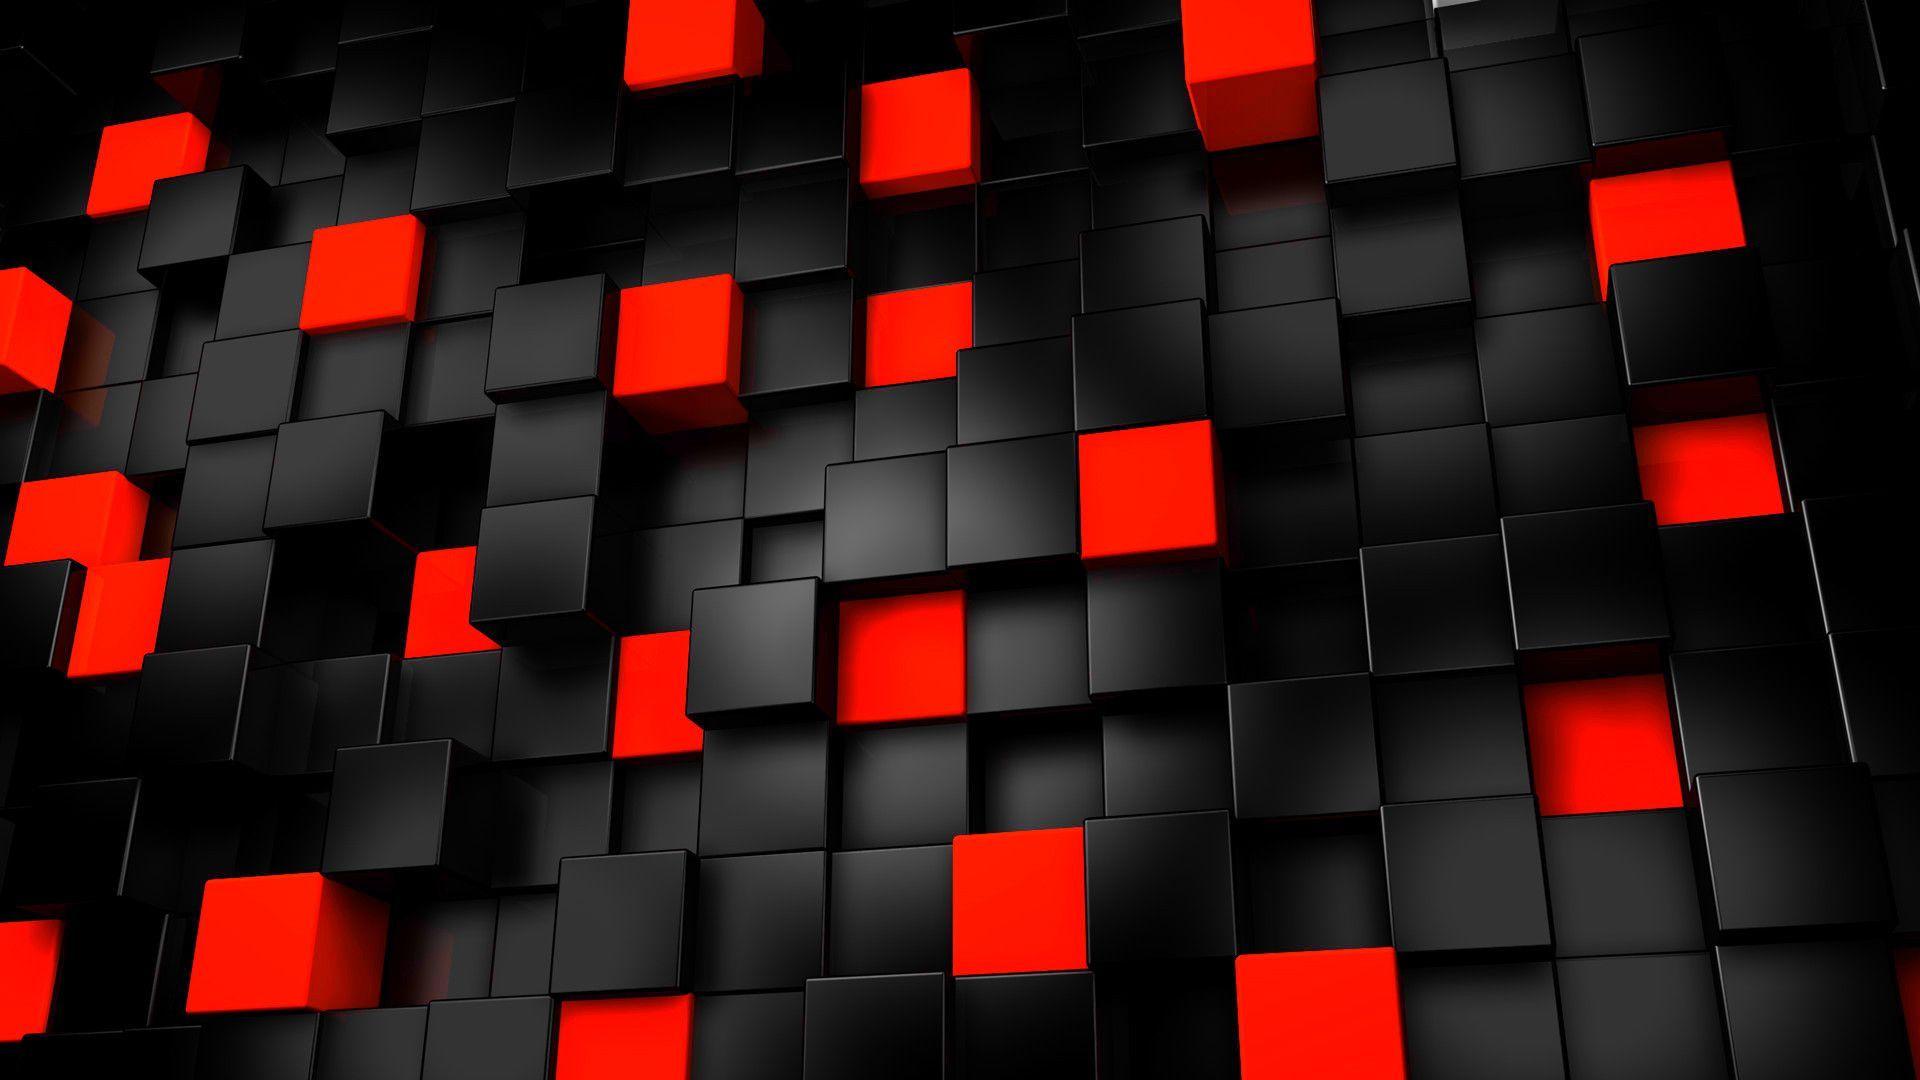 Abstract Black And Red Cubes Wallpaper, Fre HD Wallpaper